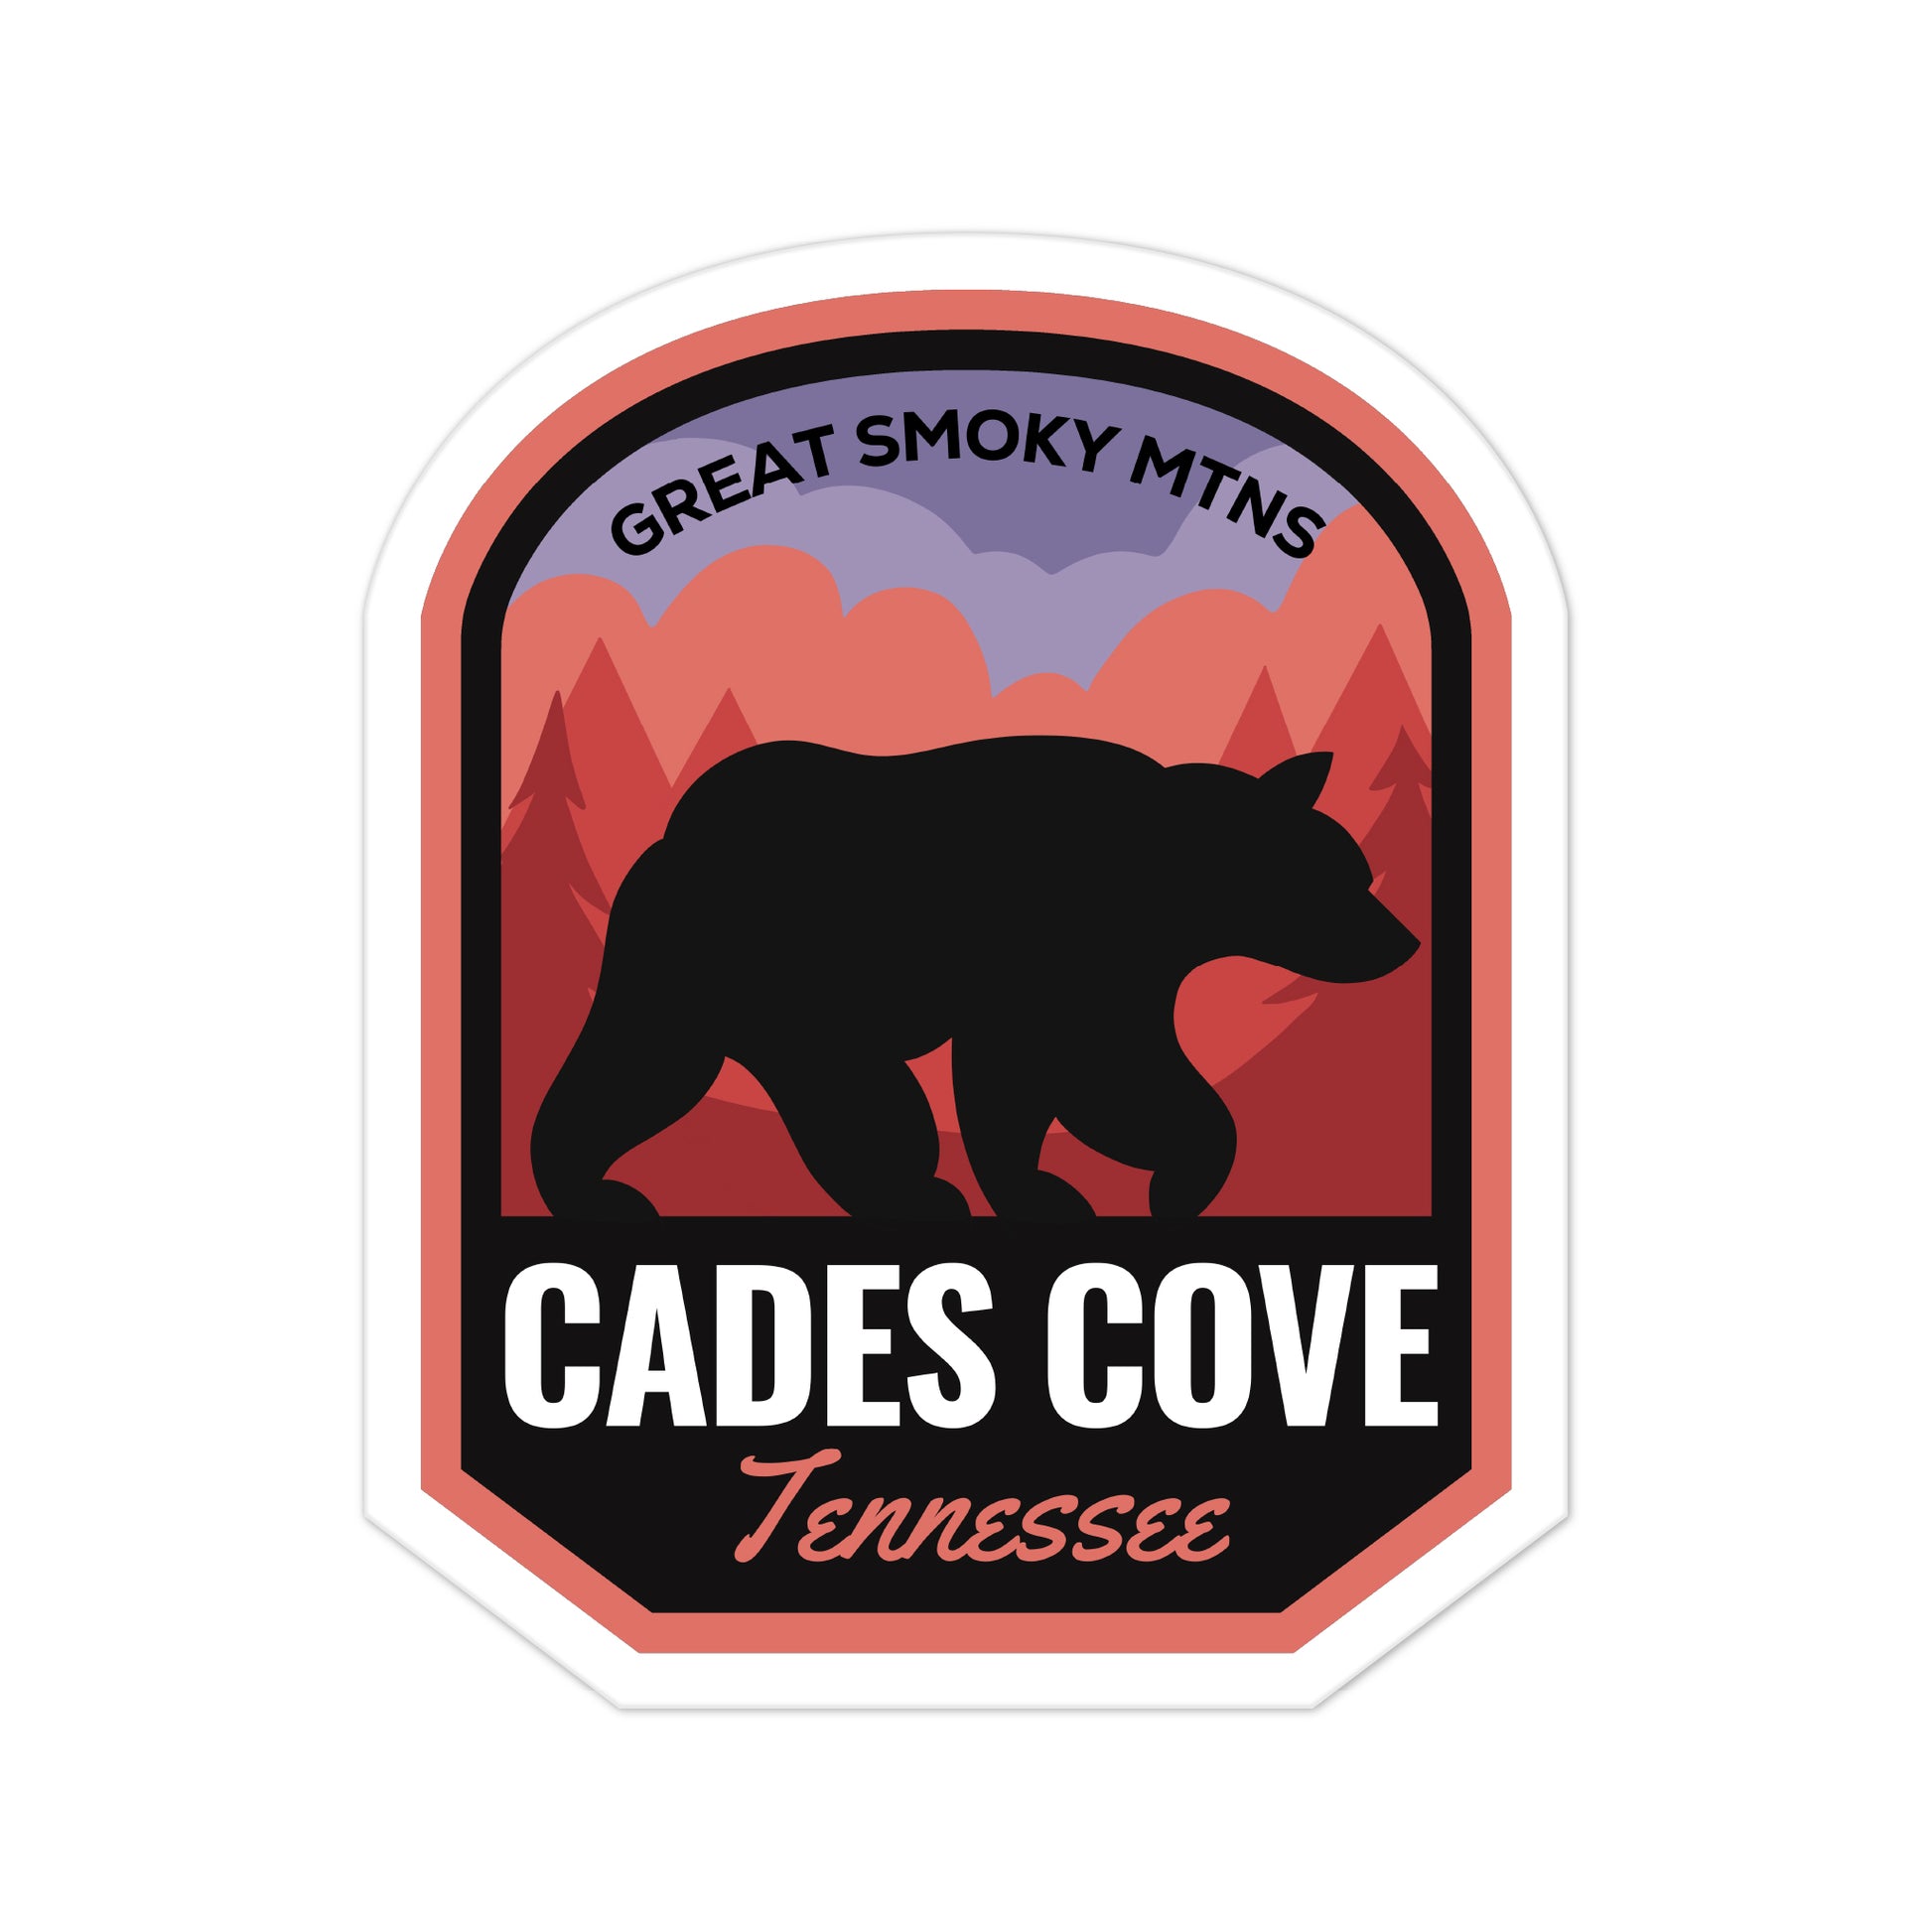 A sticker of Cades Cove Tennessee